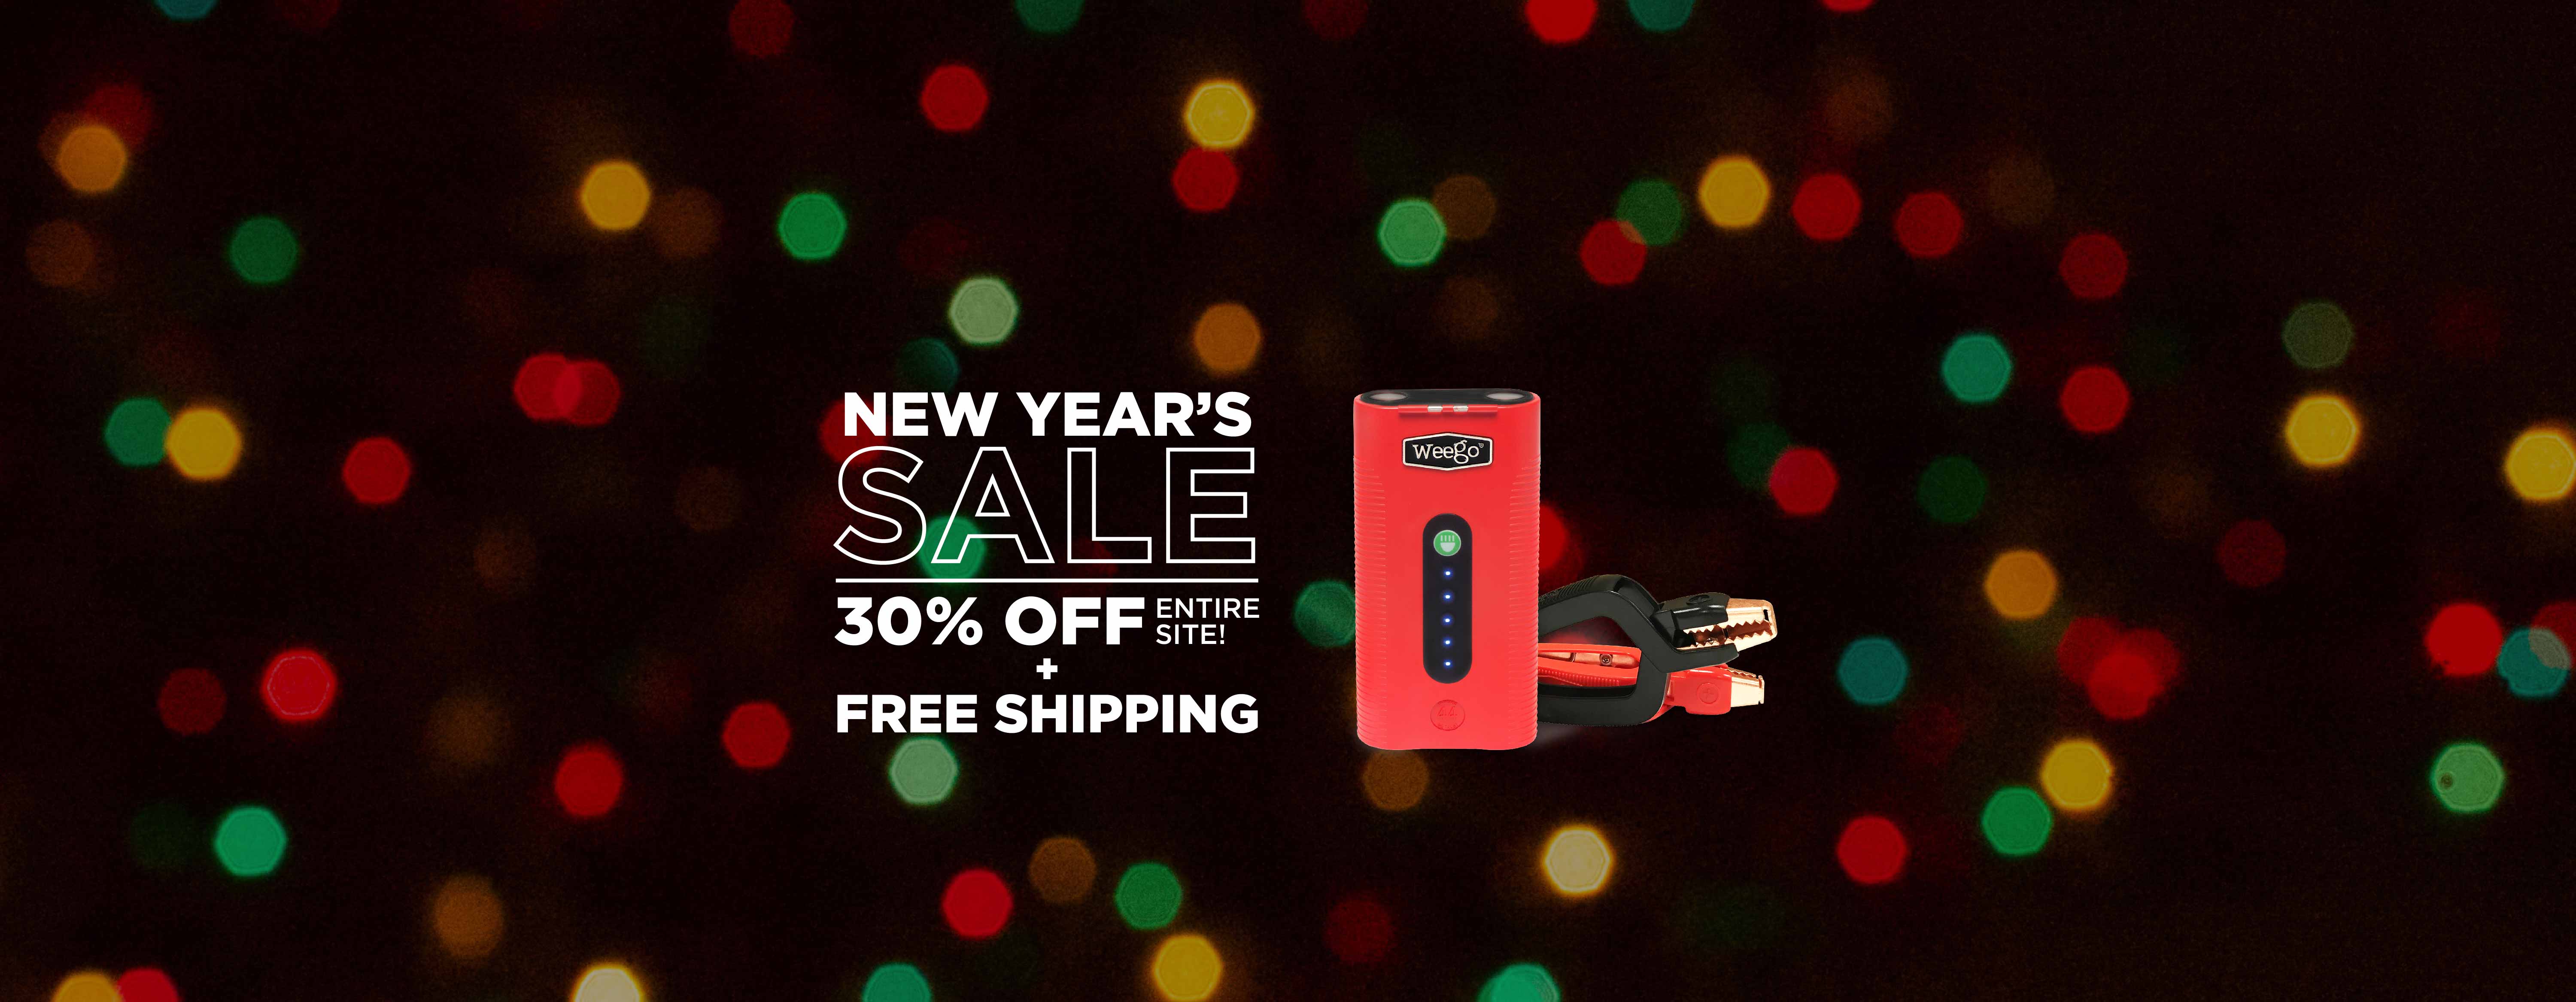 Weego Portable Power New Year's Sale! 30% OFF + Free Shipping